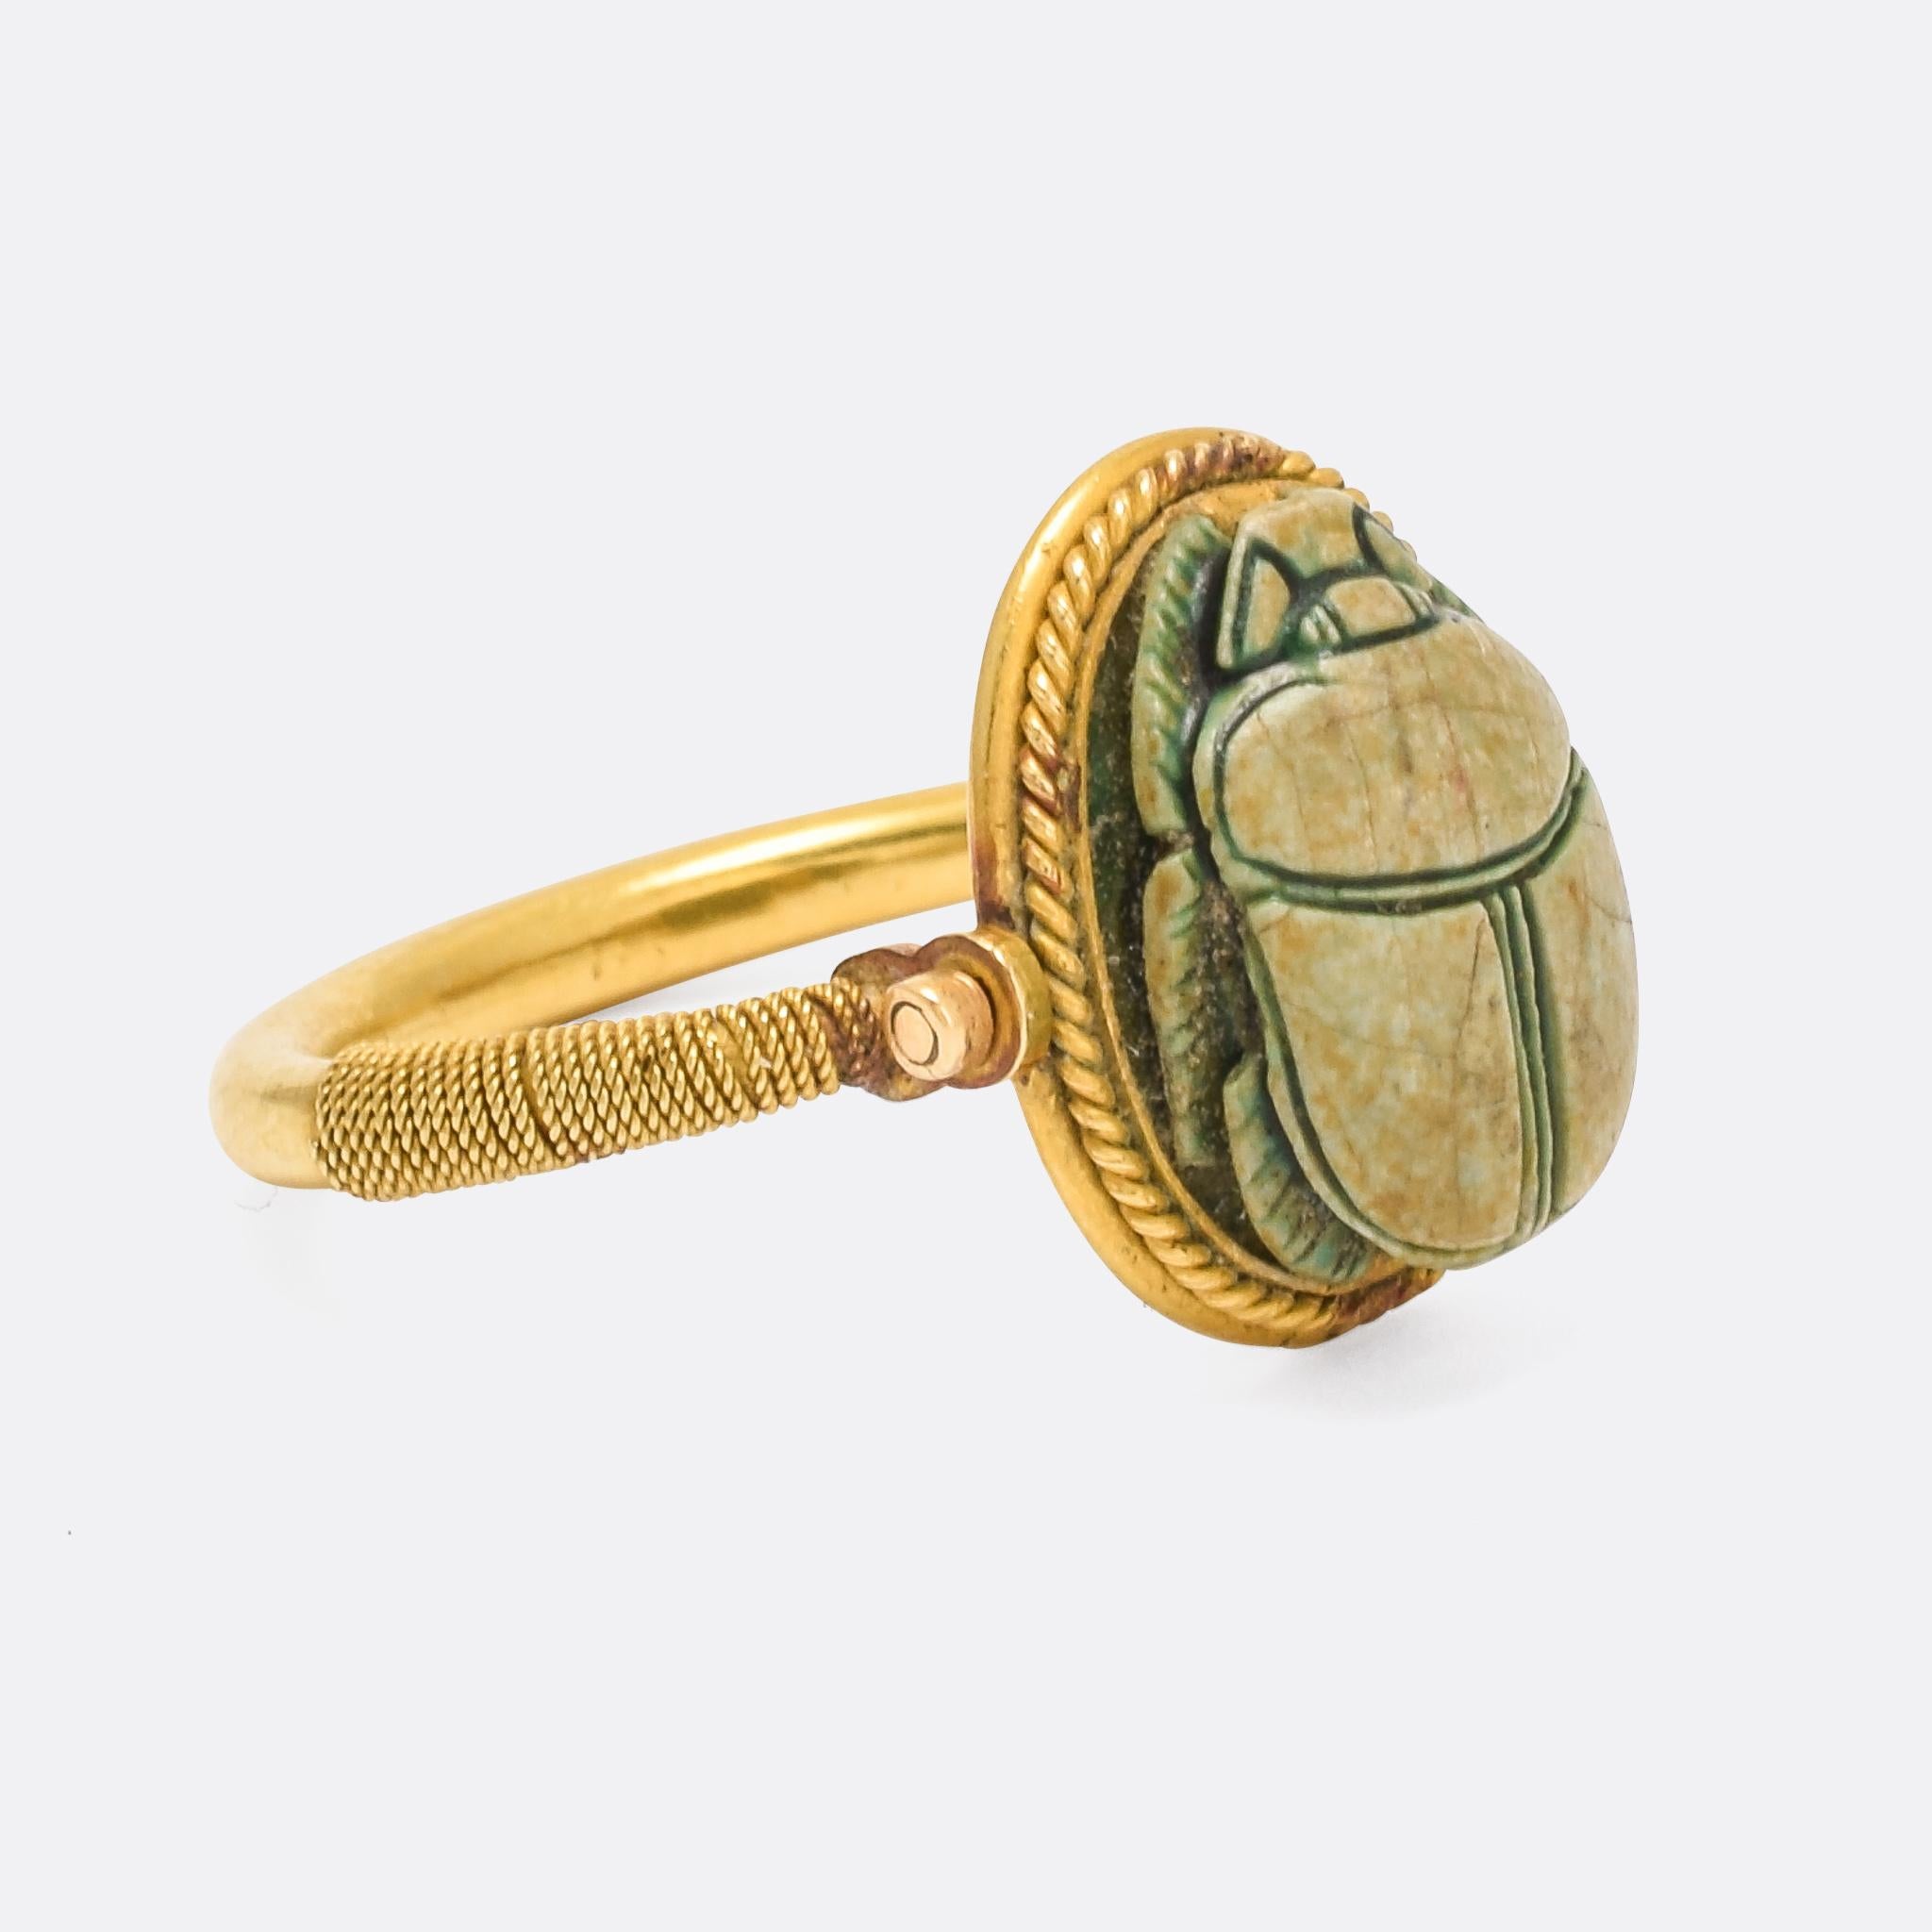 A particularly fine example of a Victorian Egyptian Revival Scarab Spinner ring, dating from the 1870s. The faience scarab is delicately carved, featuring a lotus and barley motif to the reverse. The head spins freely, and the ring features wound